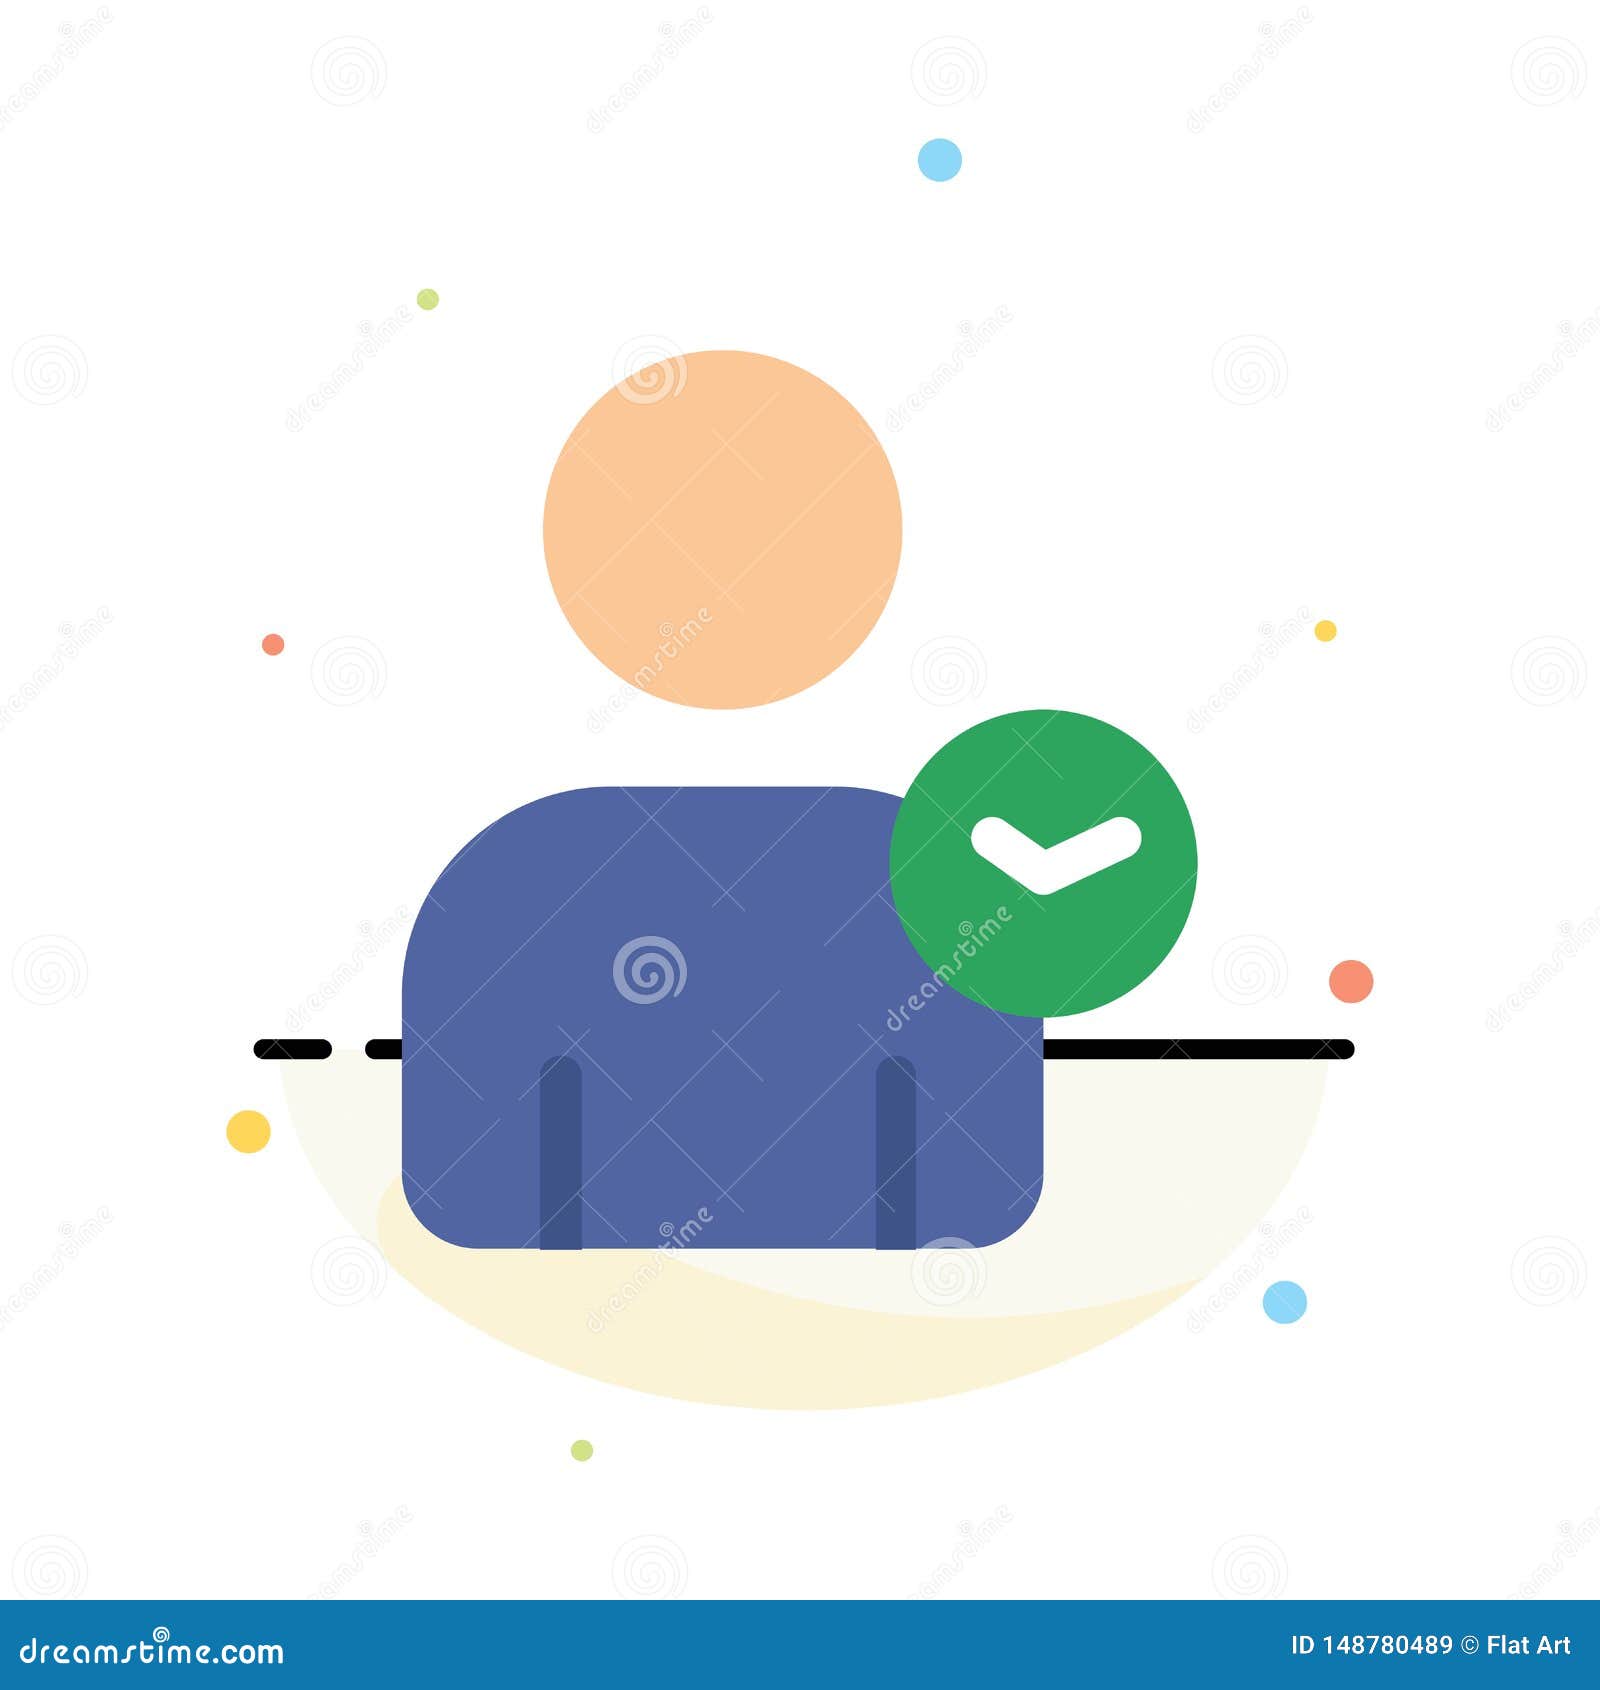 man, user, time, basic abstract flat color icon template